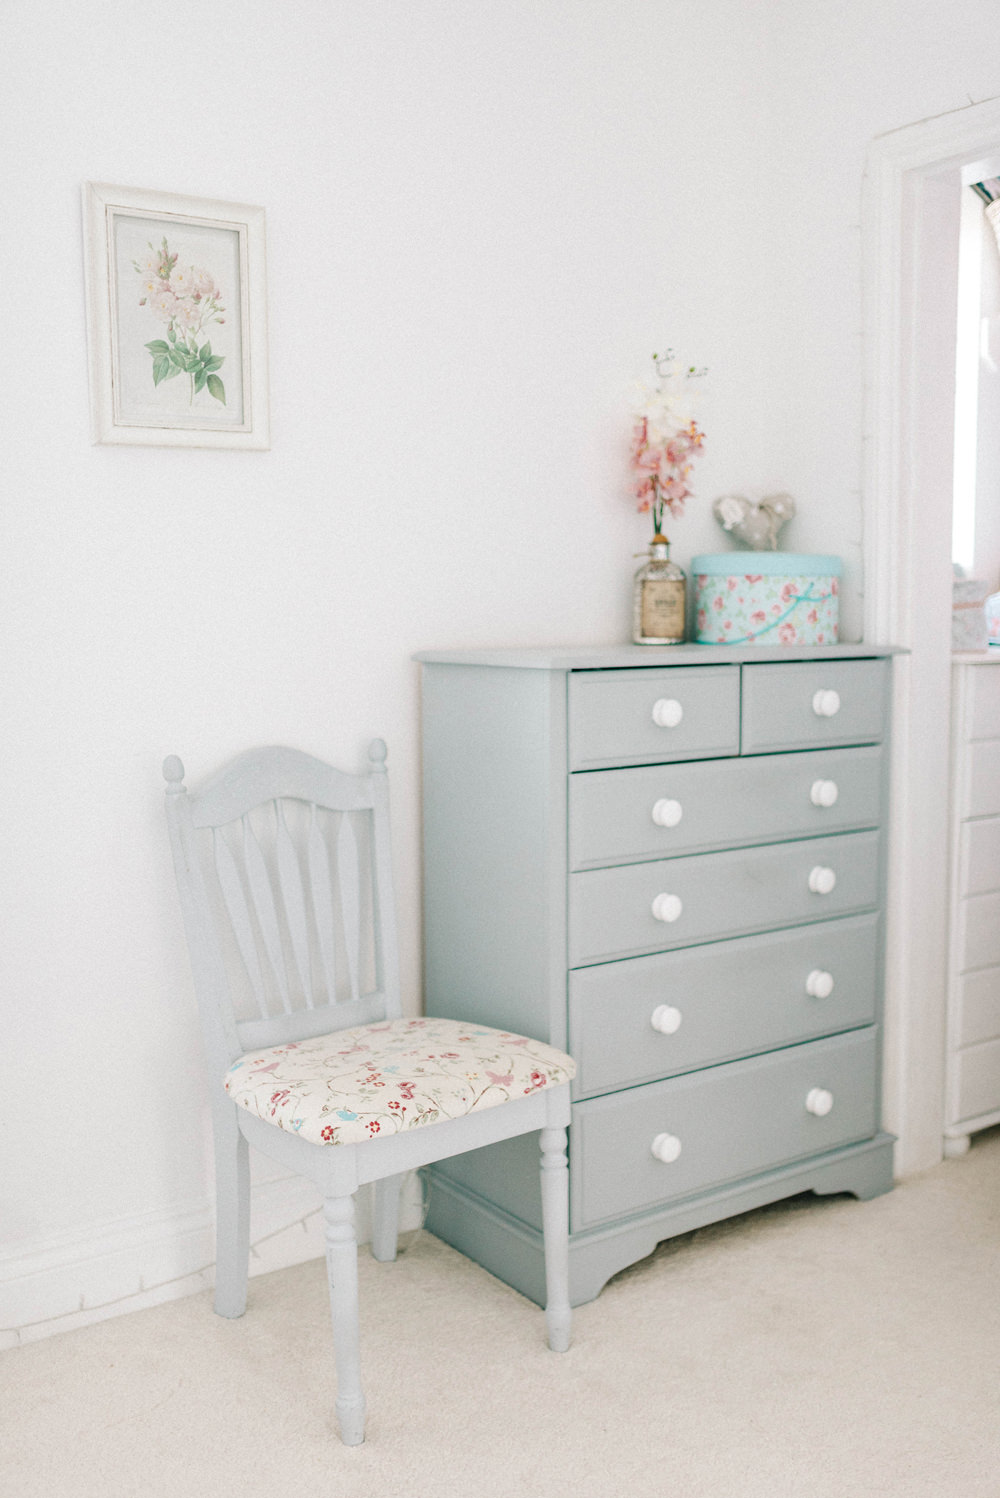 Painted furniture and vintage style bed